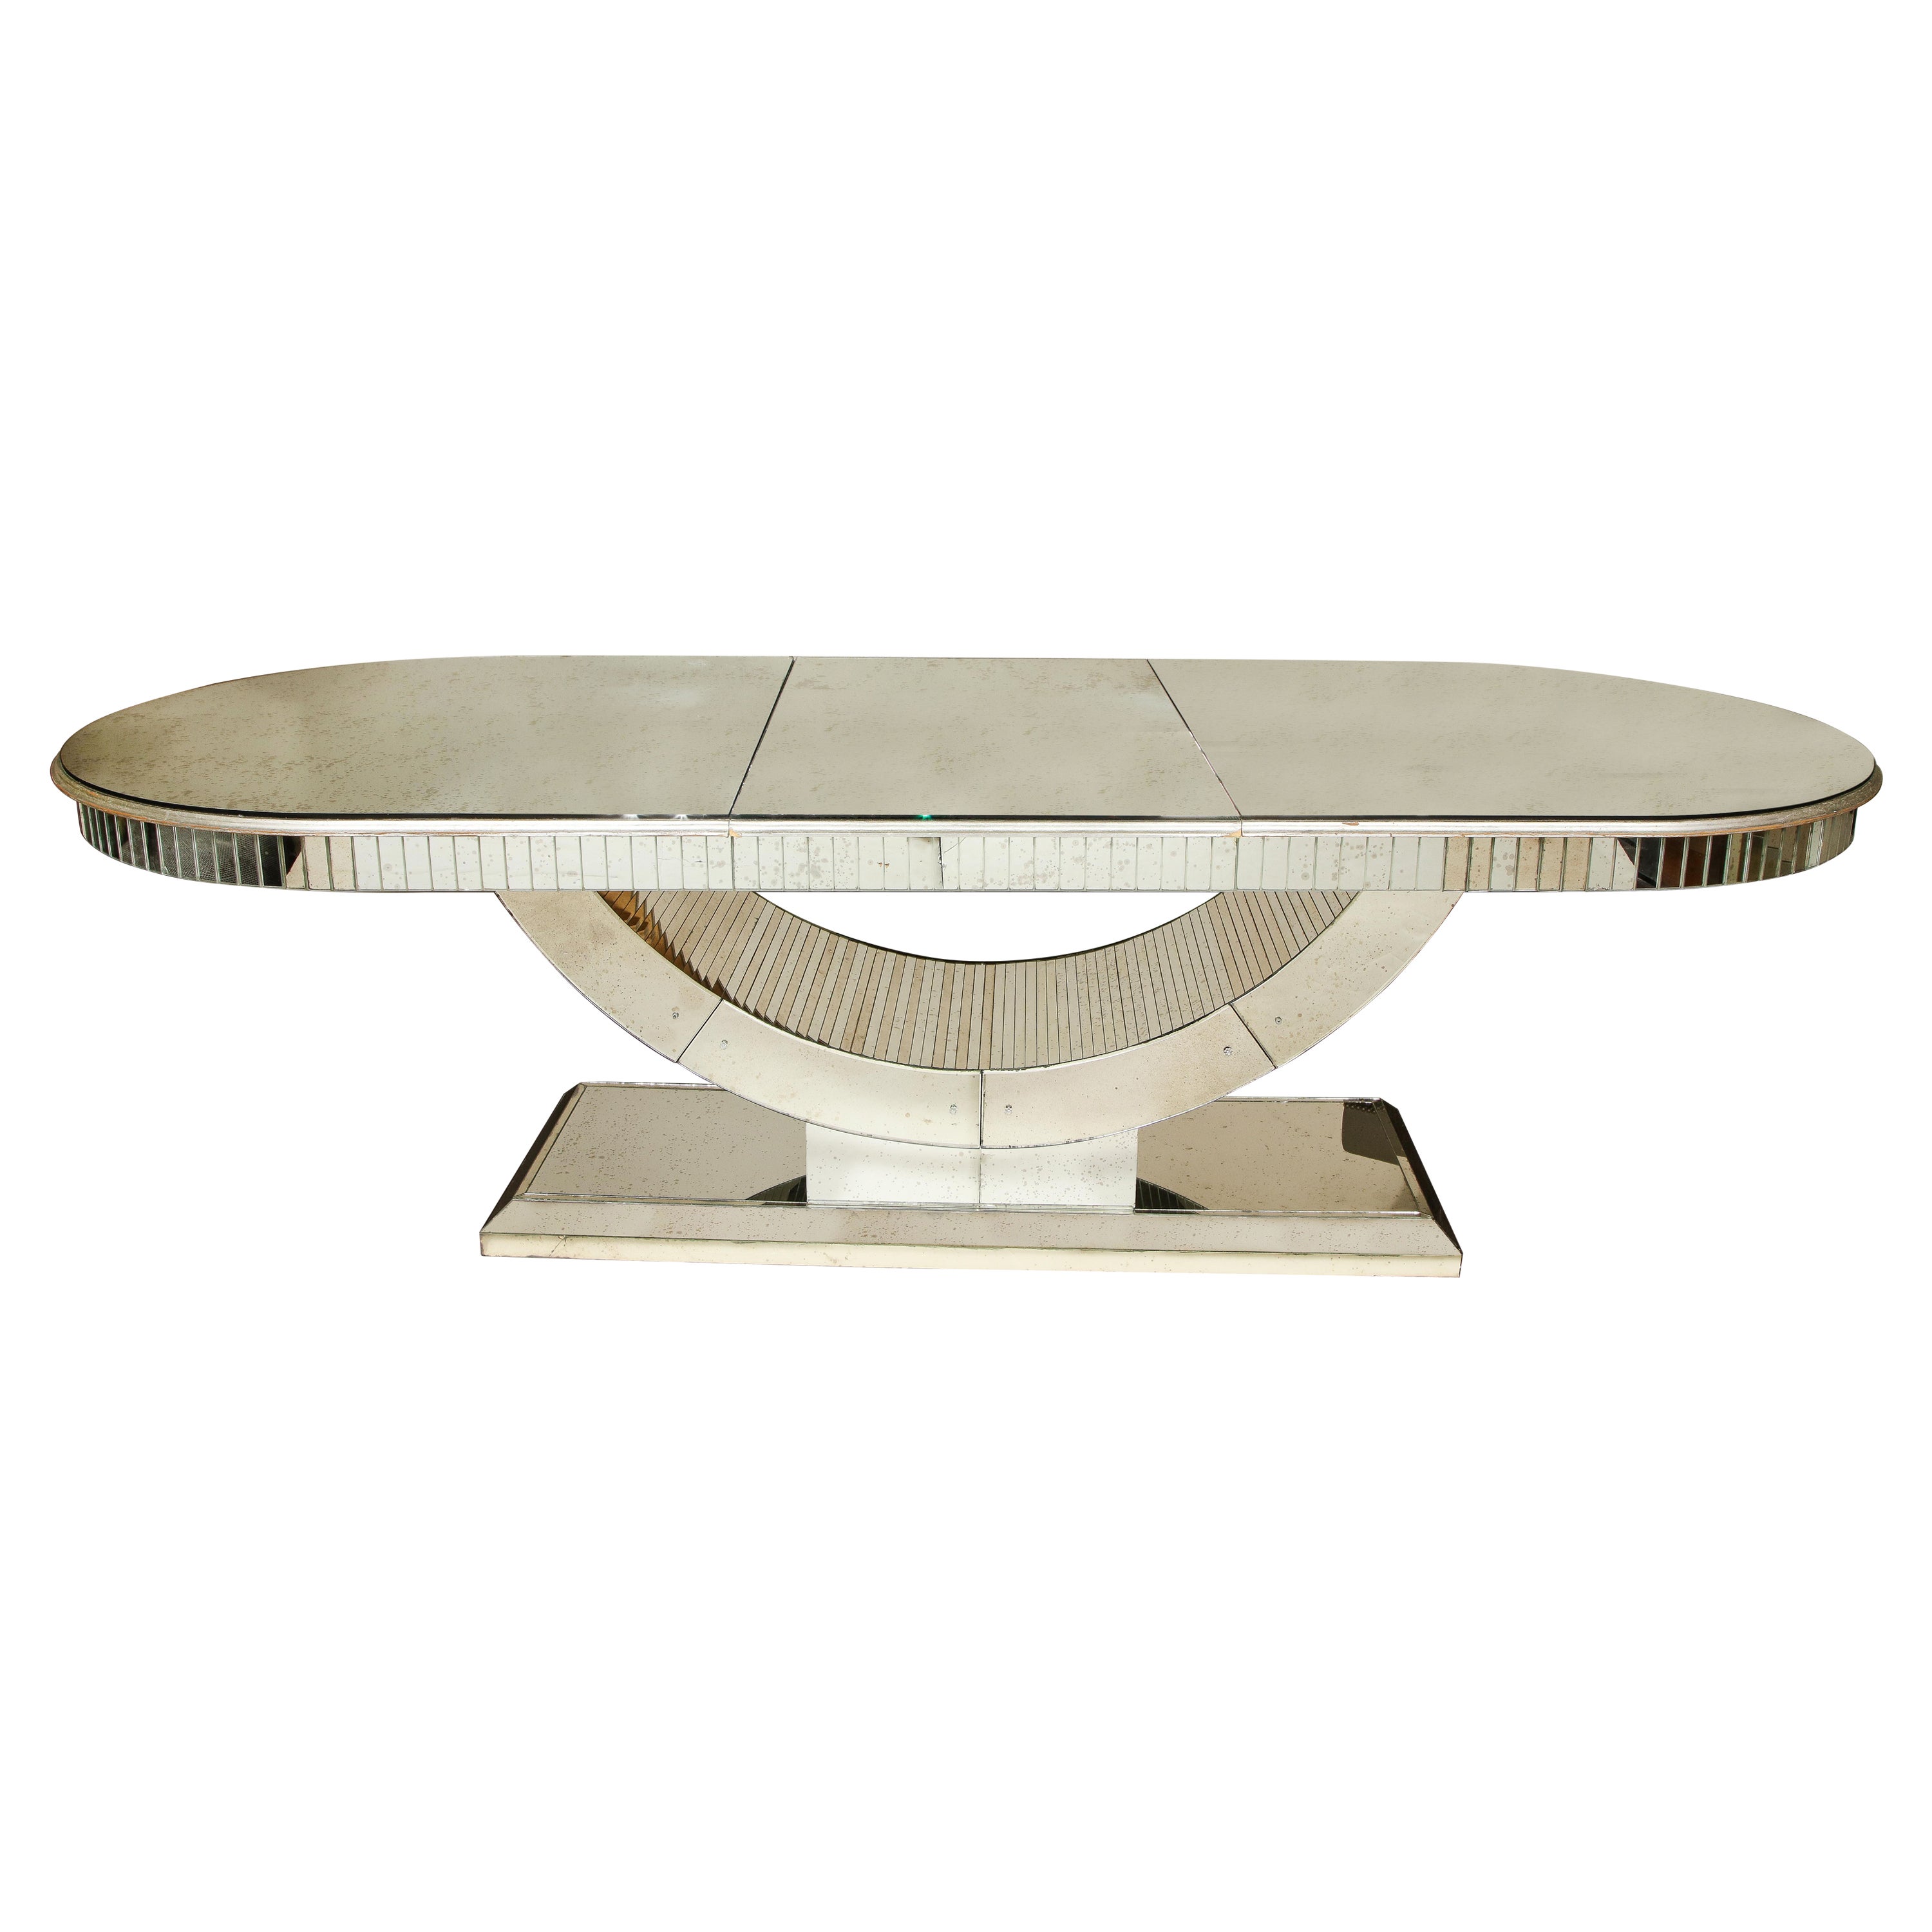 Elegant extension dining table with hand cut and applied antiqued mirror, glass rosettes and  painted silver trim. American, 2010.  This table seats 8 comfortably.

 Dimensions

Length without extension leaf: 78 inches
Length of extension leaf: 24